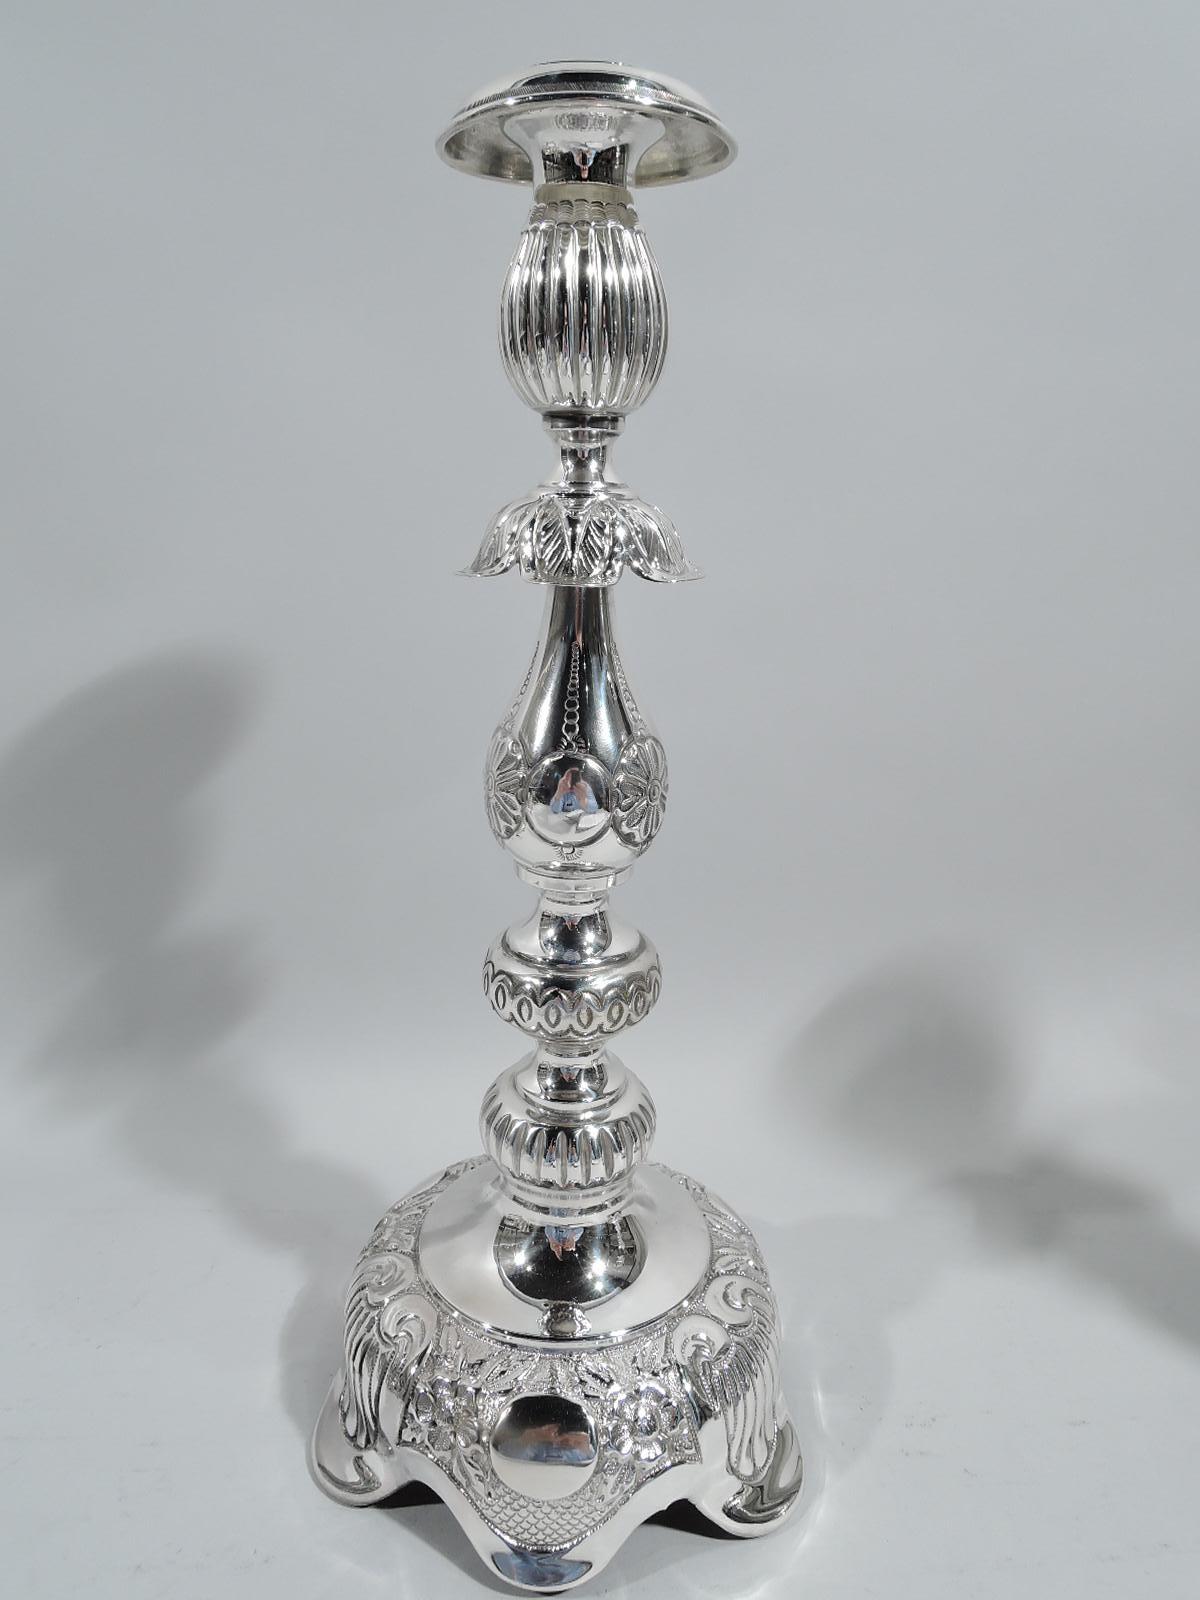 Pair of Old Country sterling silver candlesticks, ca 1920. Each: Baluster shaft with double knops and leaf flange on domed foot with deeply scrolled rim. Naïve ornament including flowers, shells, fish scales, and guilloche. In traditional Russian or